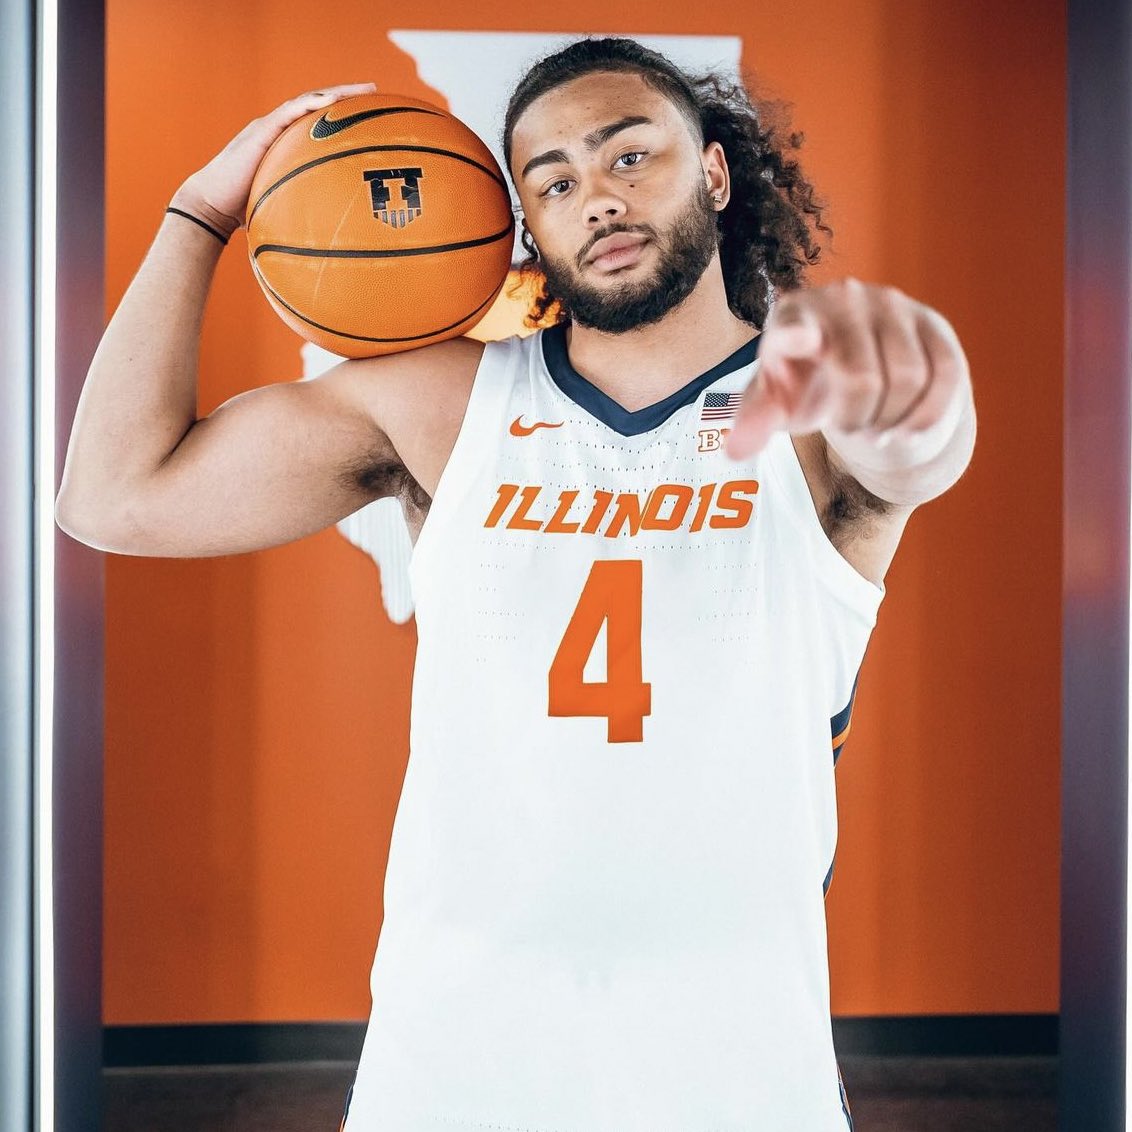 Champaign native Kylan Boswell poses with a basketball for promotional photos with Illini Athletics.